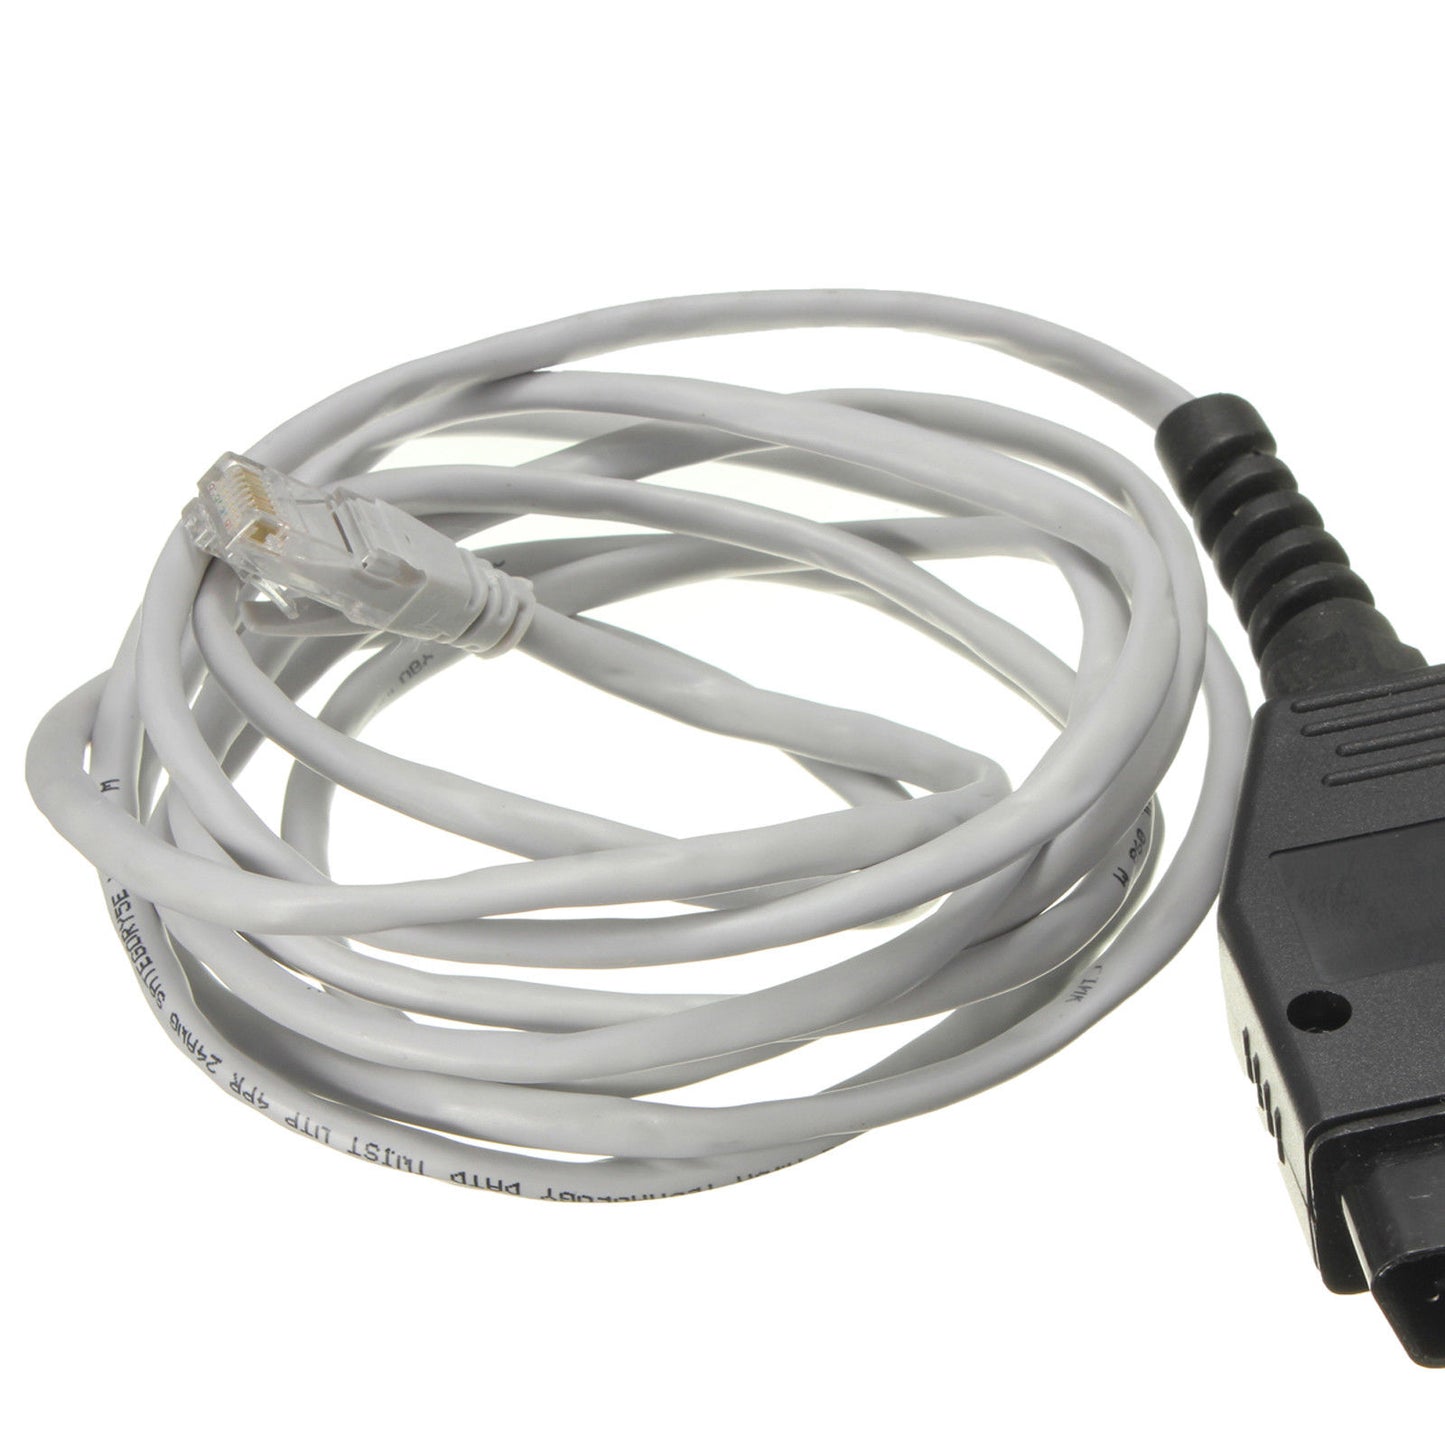 ENET Ethernet to OBD II OBD2 Cable Interface E SYS ICOM Coding F Series For BMW - Lifafa Denmark